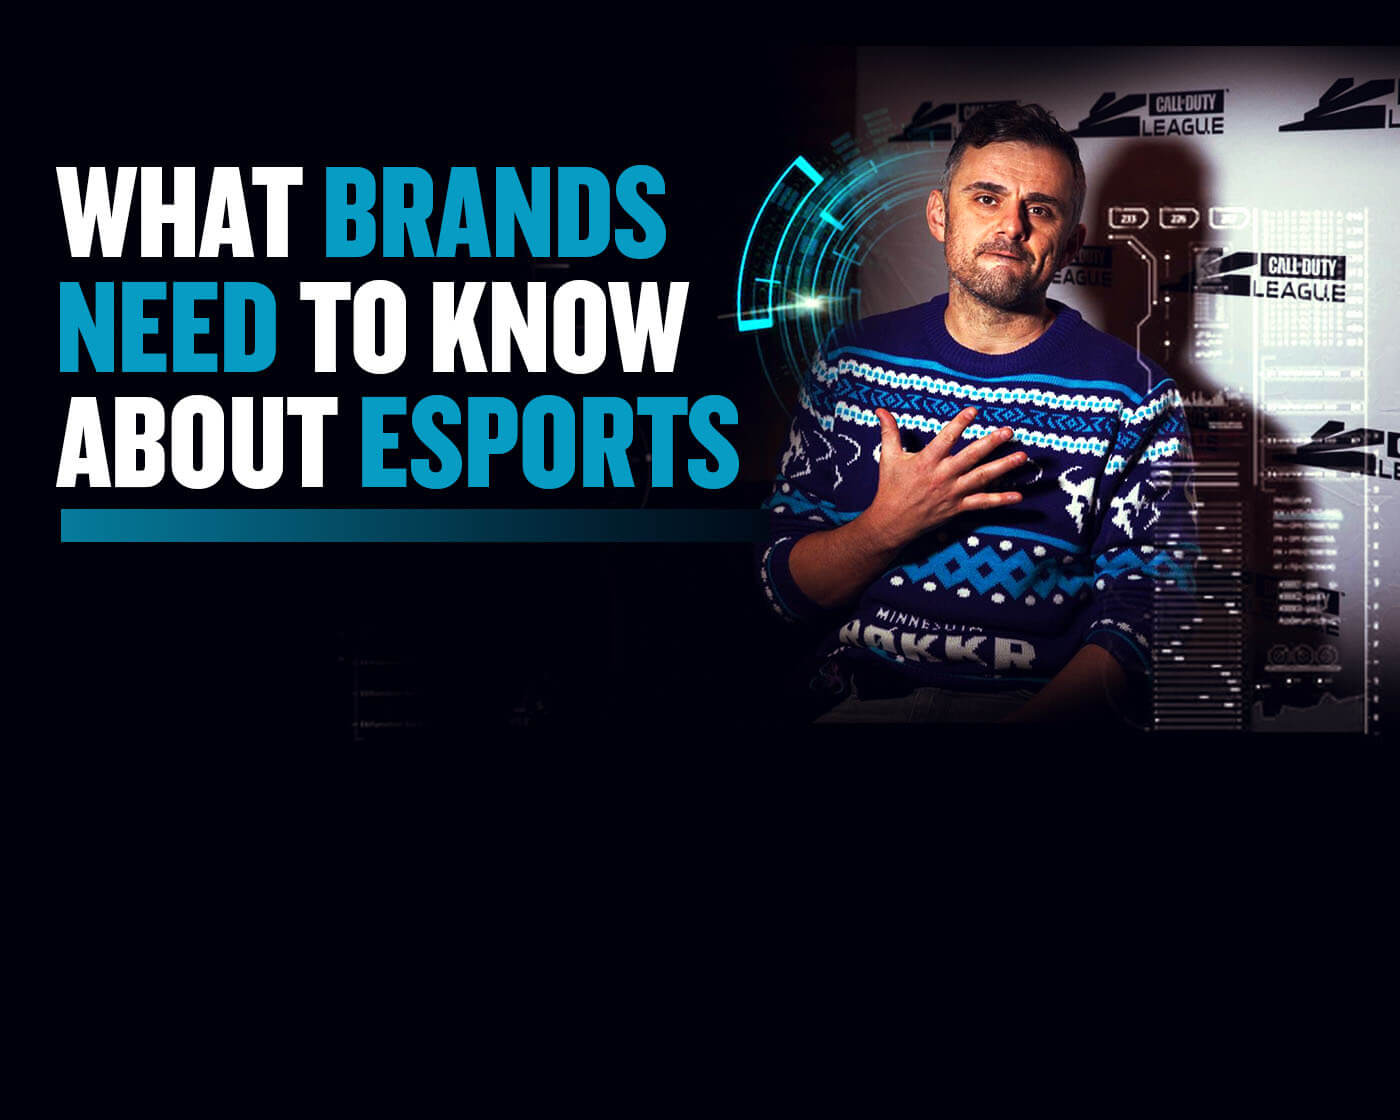 What brands need to know about esports